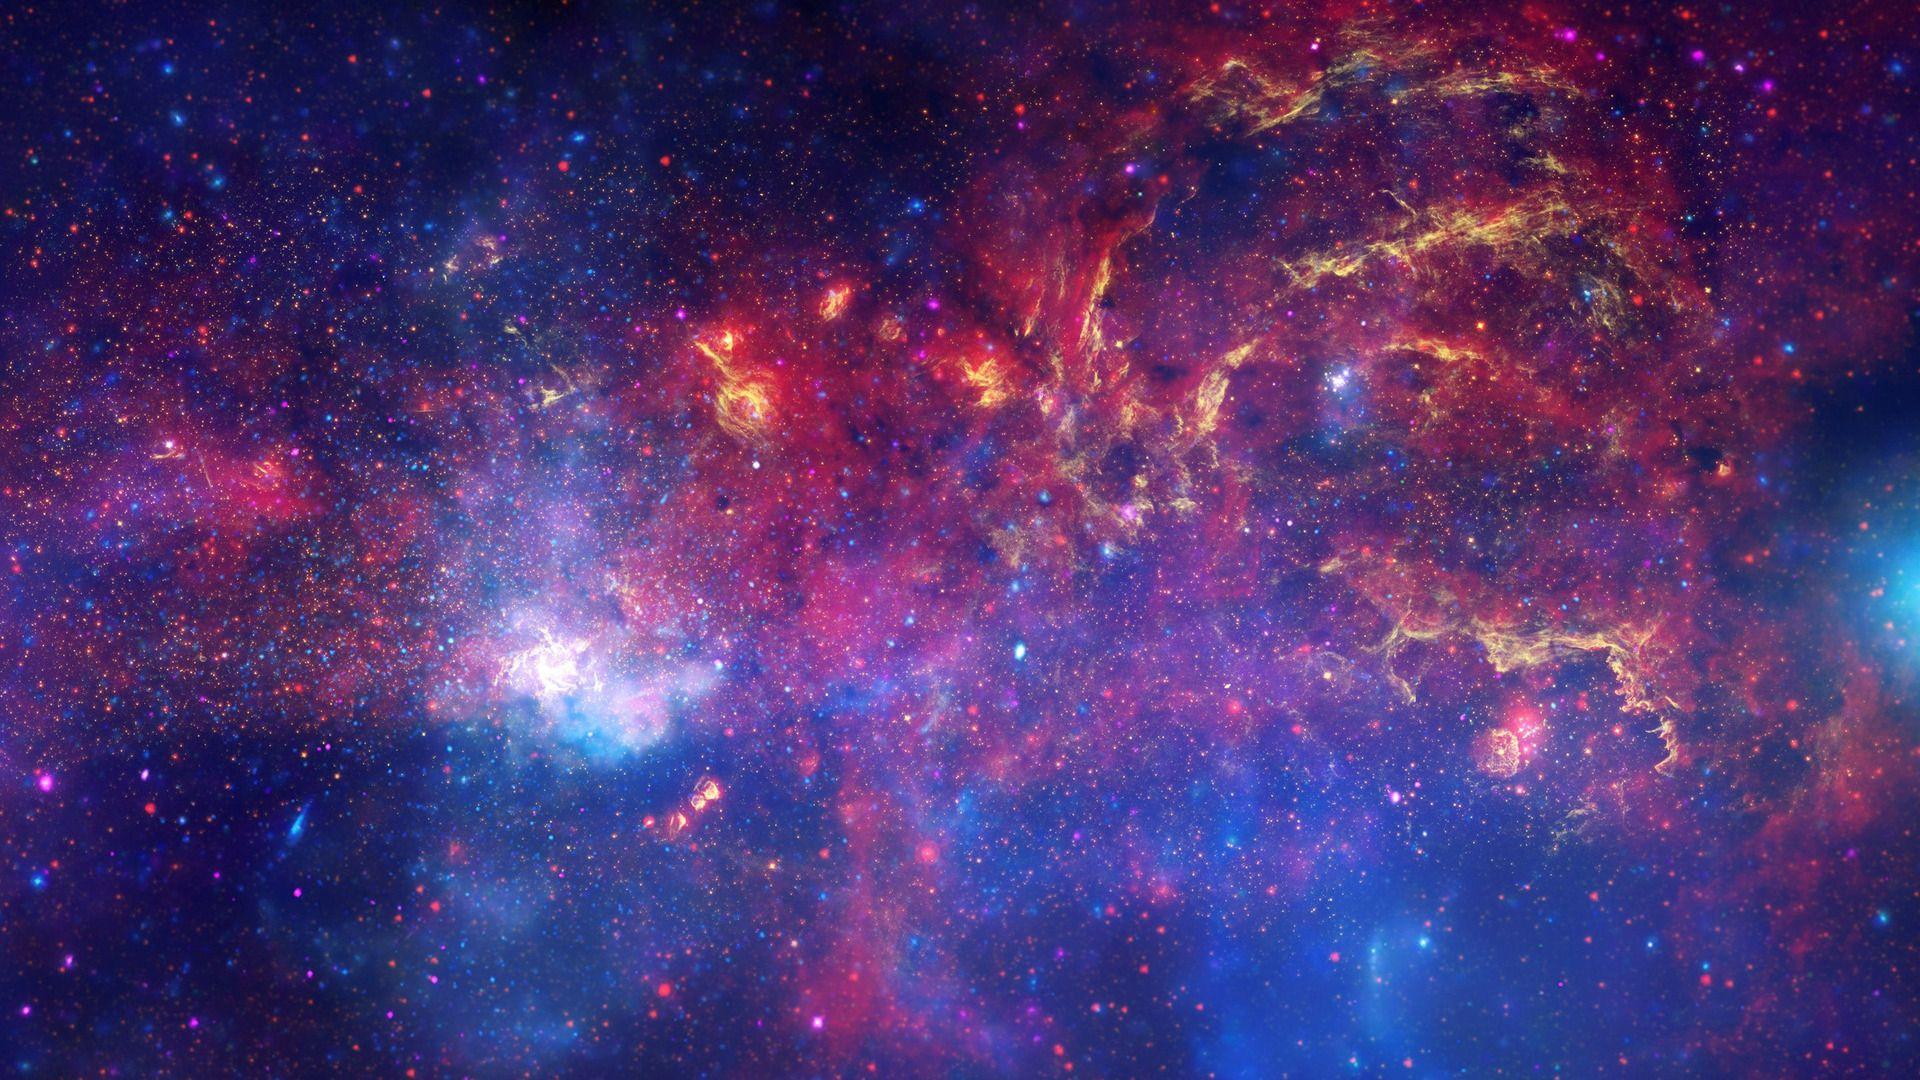 Wallpaper.wiki Amazing Space Galaxy Background 1080p PIC WPD008676